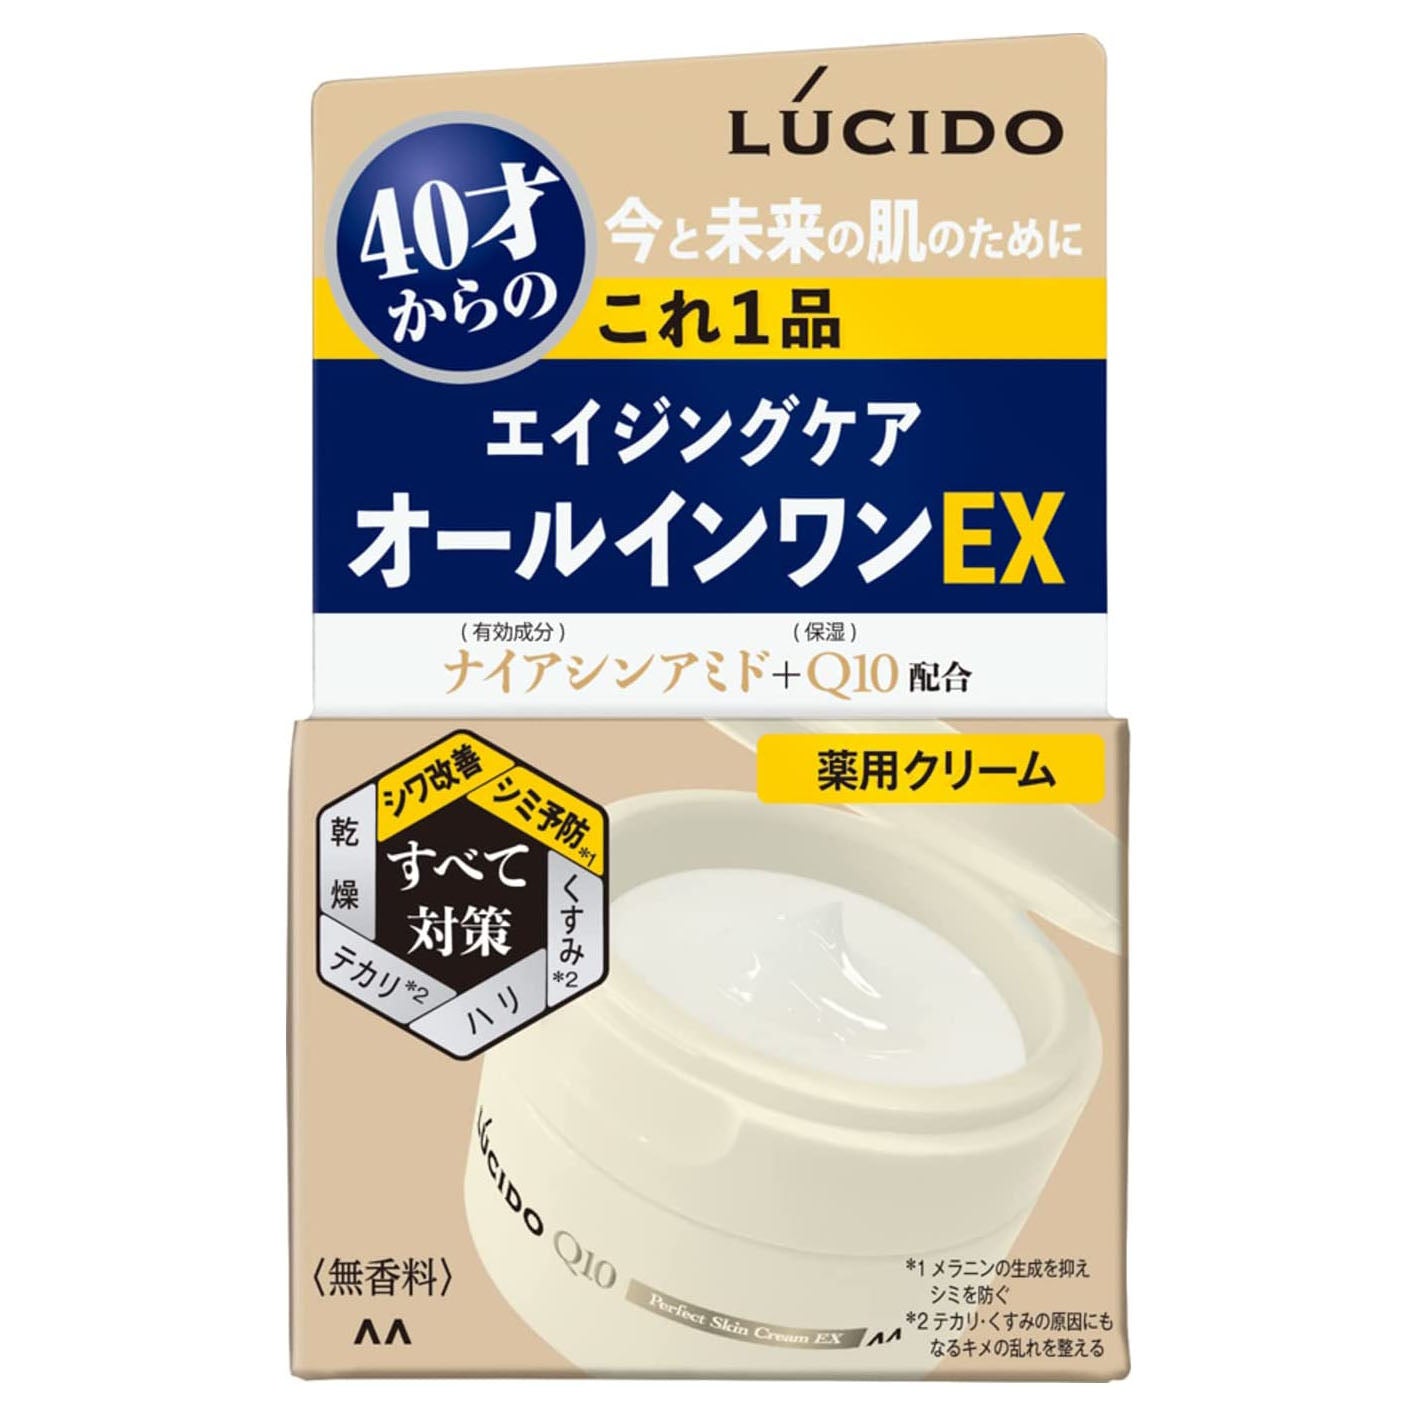 Lucido Medicated Perfect Skin Cream EX 90g - Harajuku Culture Japan - Japanease Products Store Beauty and Stationery